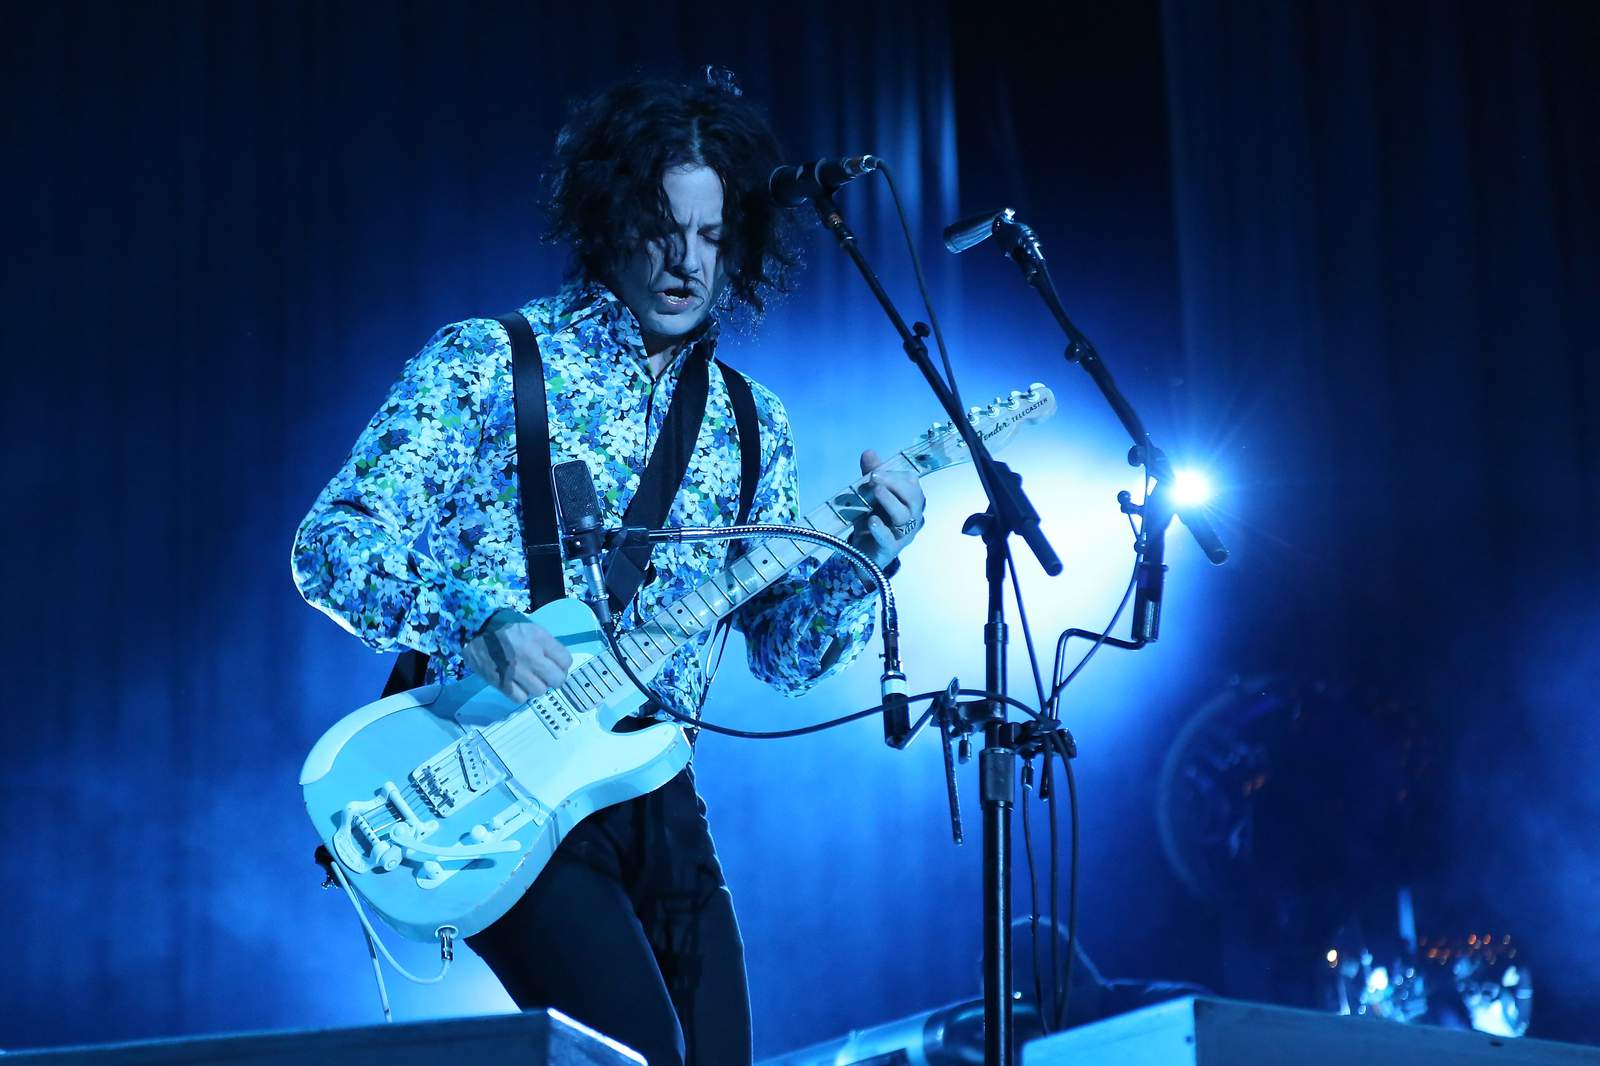 5 things you probably didn’t know about Jack White